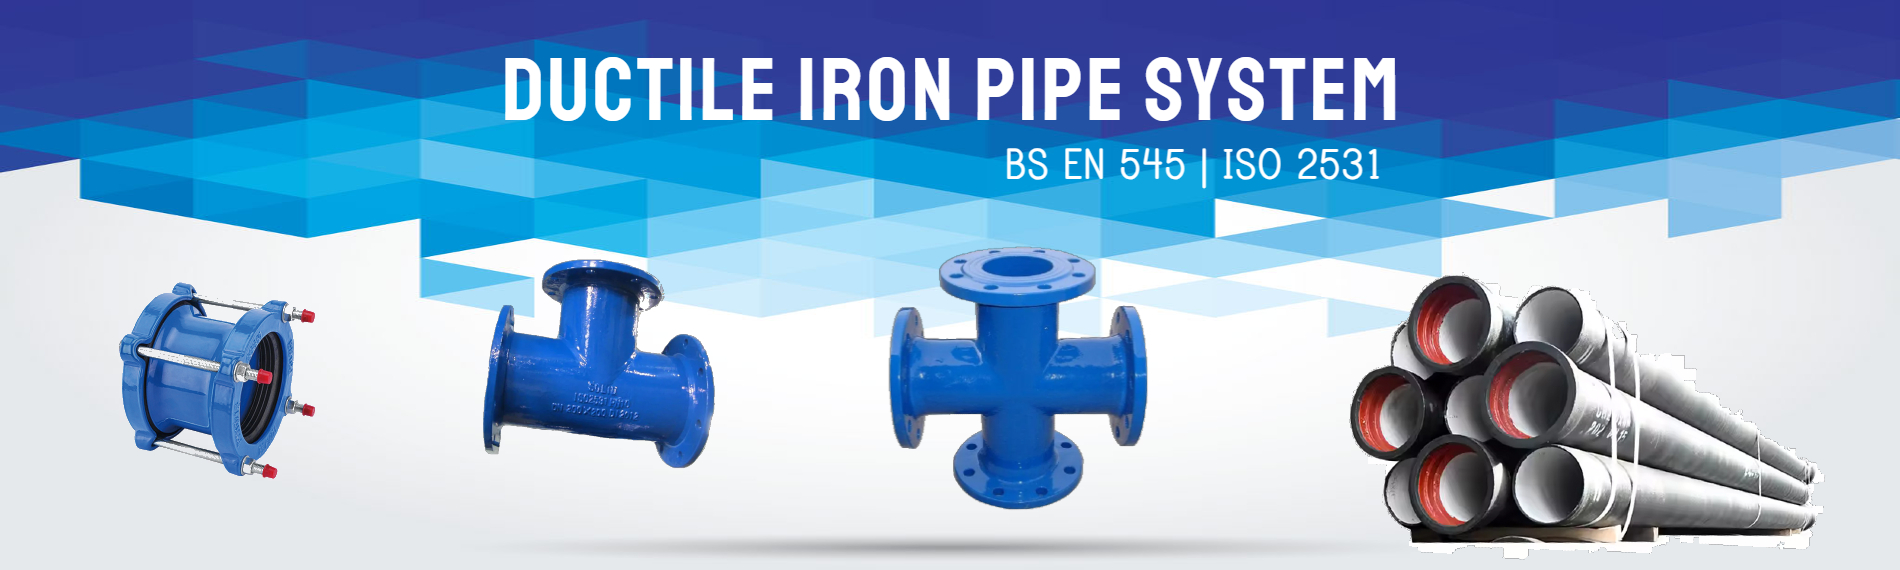 Ductile iron pipe system